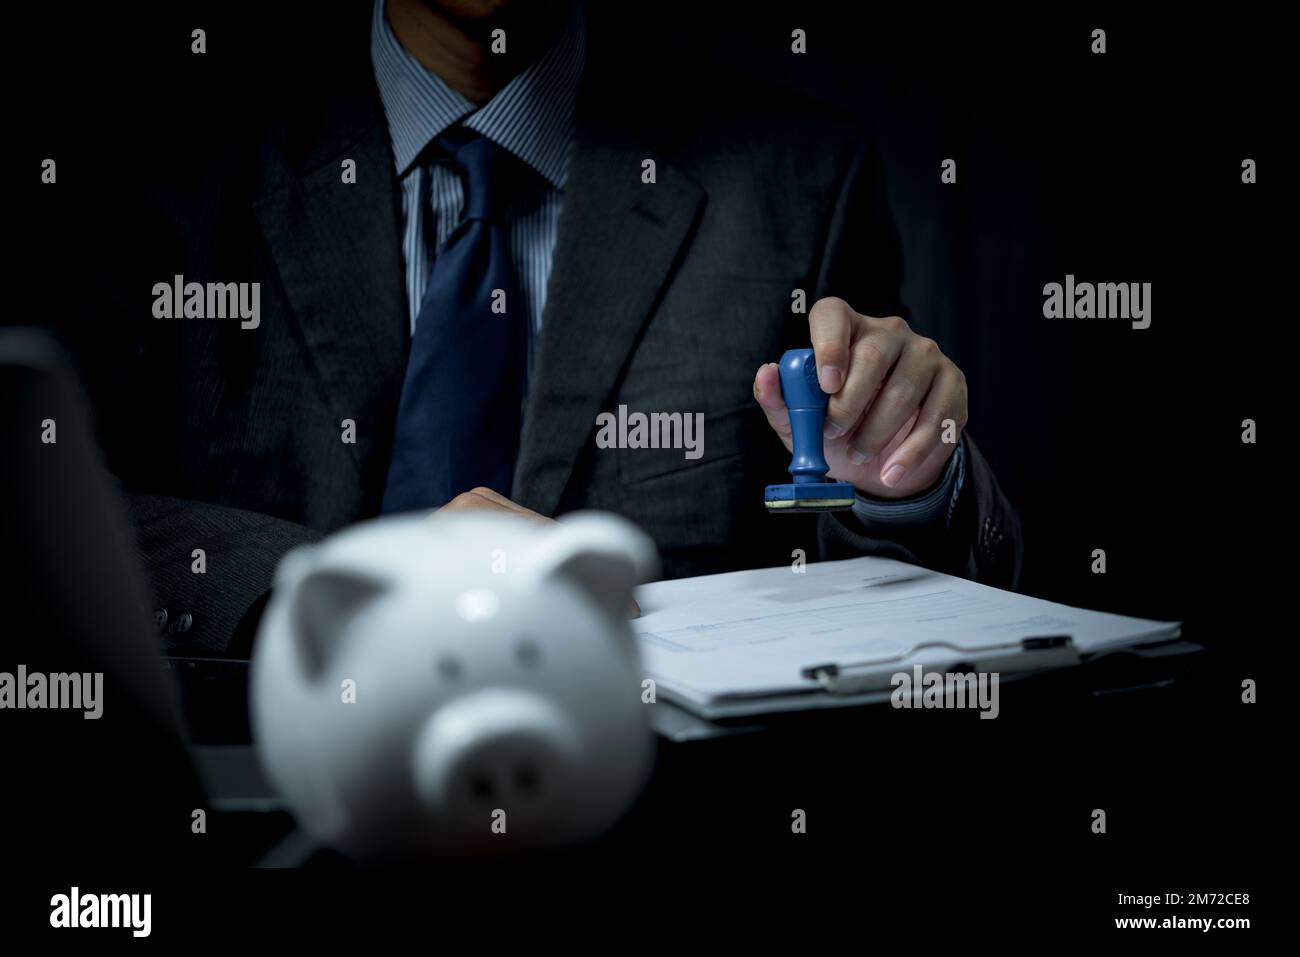 Businessperson is stamping a rubber stamp on a financial and banking approval document or paper contract agreement on desk. Stock Photo